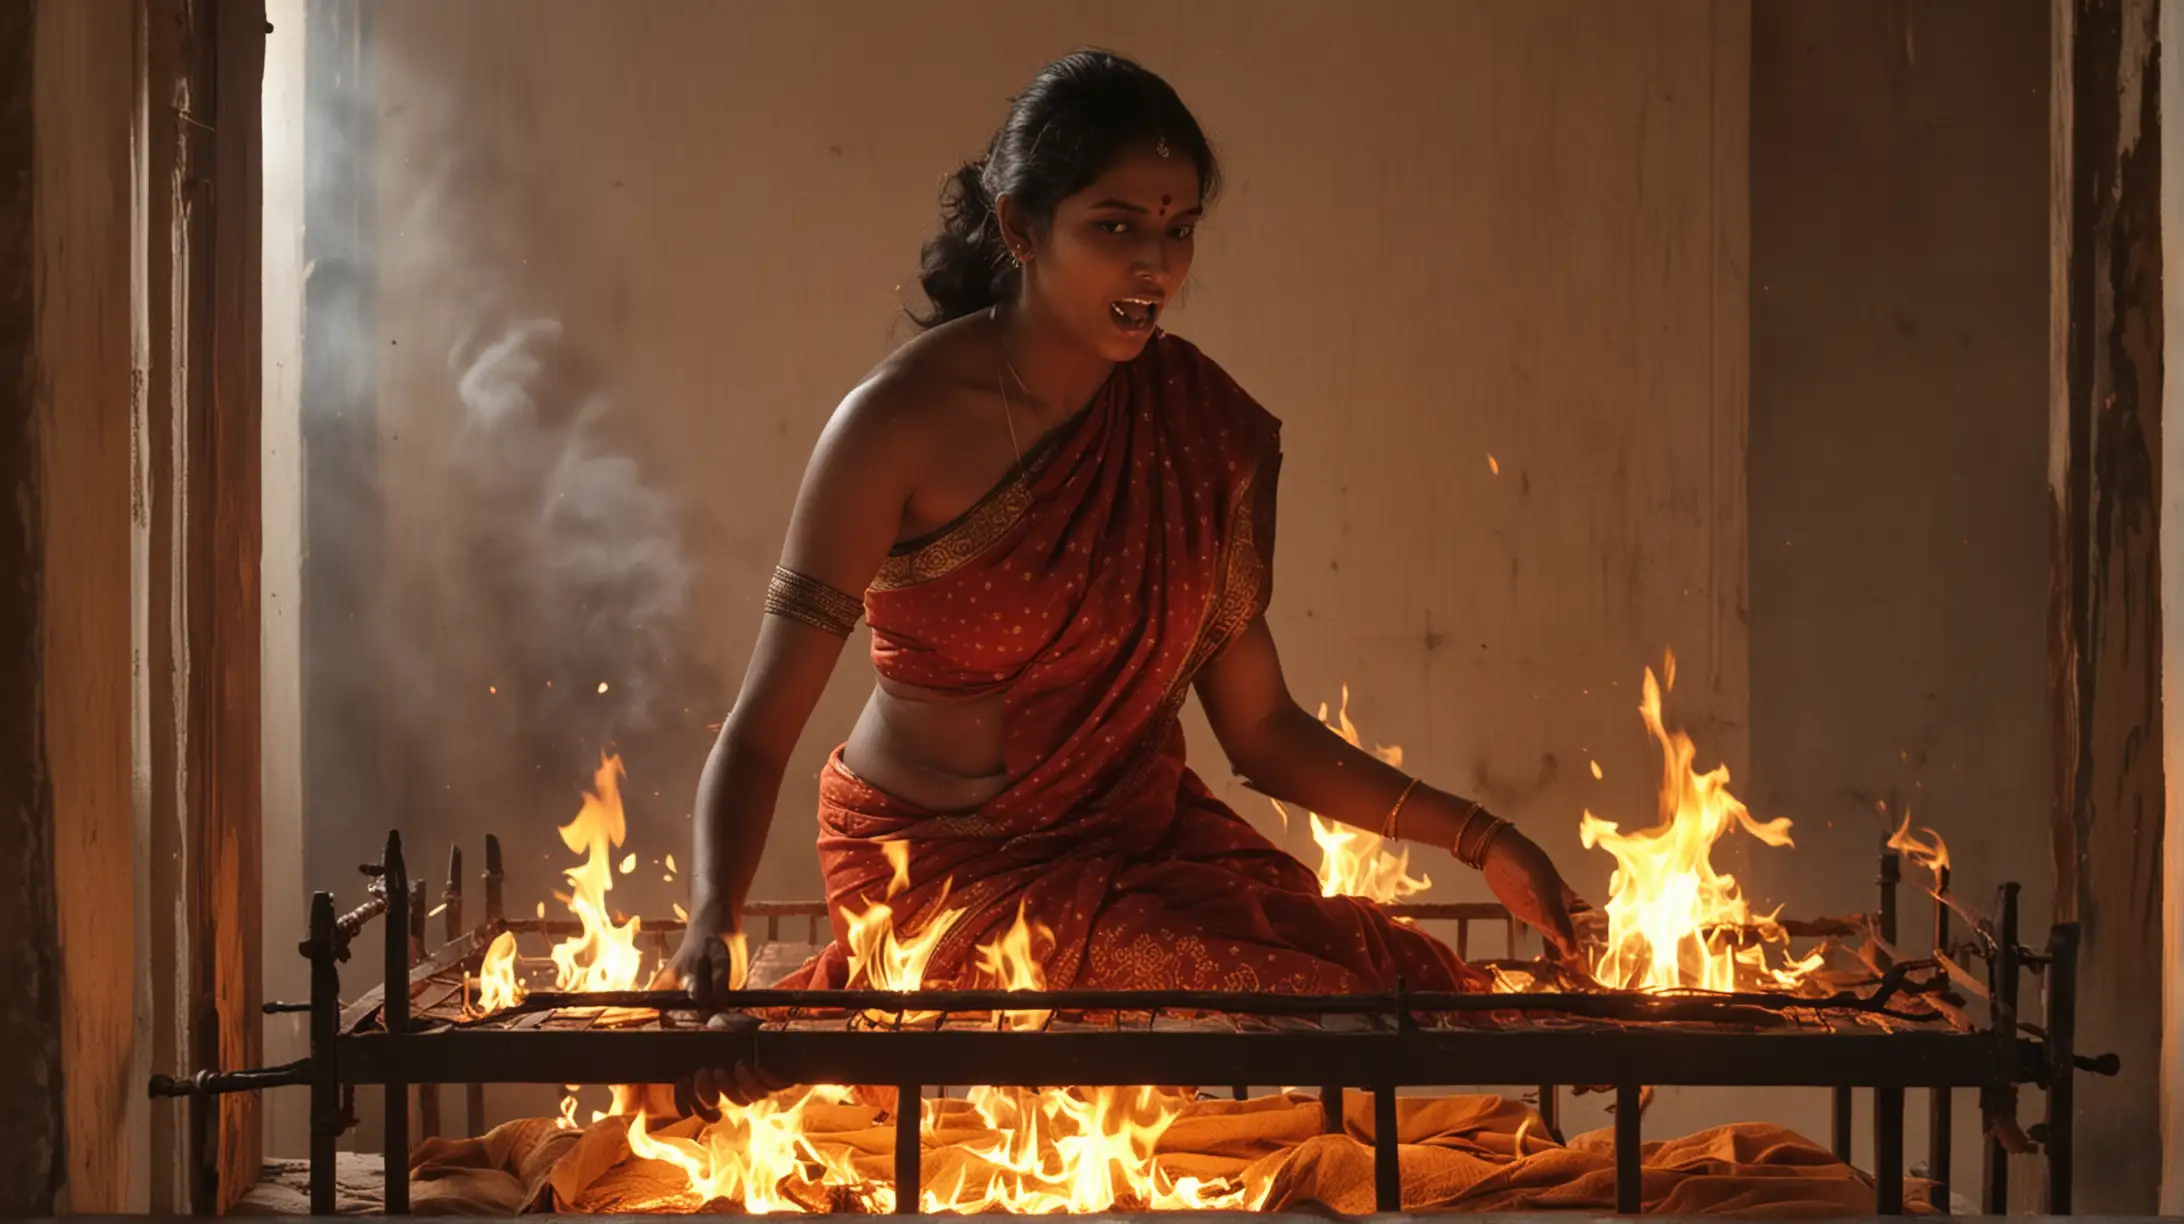 South Indian Woman Performing Ritual Fire Ceremony in Temple Room